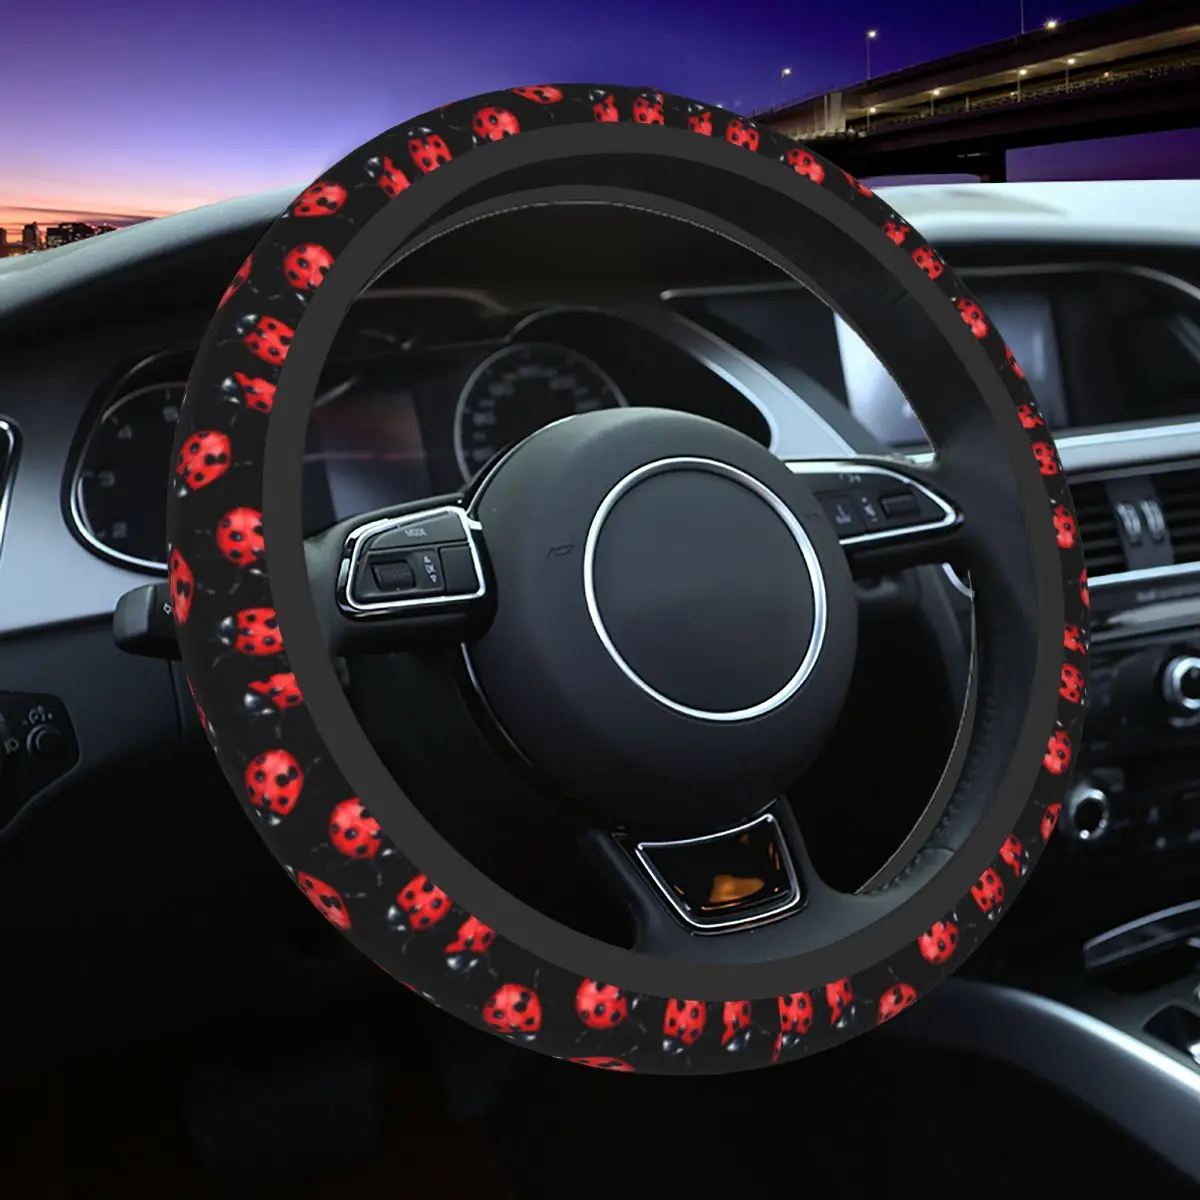 

37-38 Steering Wheel Covers Ladybug Ladybird Insect Lover Universal Auto Decoration Suitable Auto Accessories